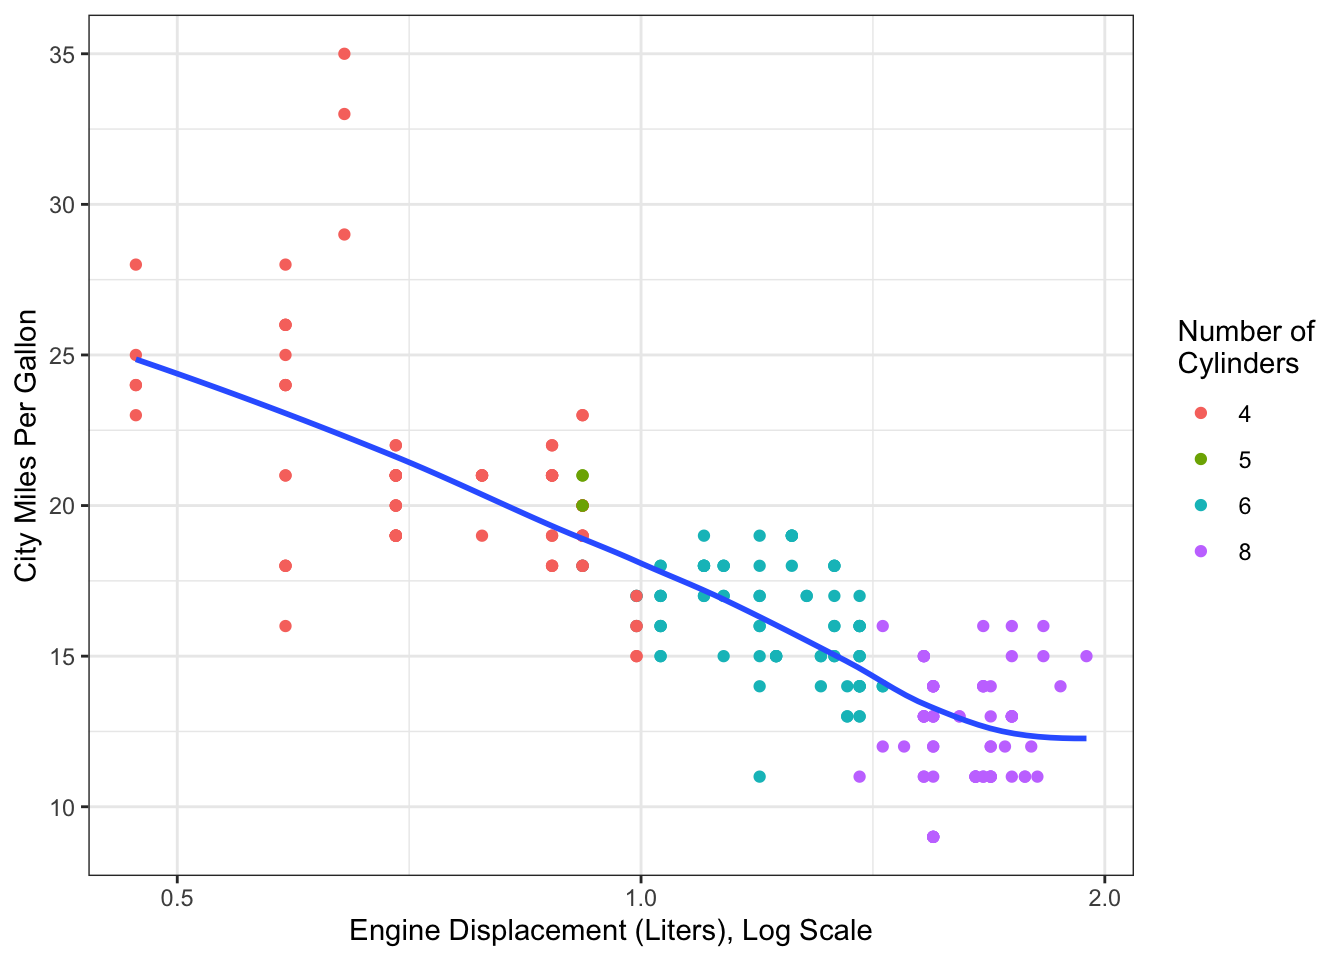 Fuel efficiency data from `mpg` dataset, with log transform for engine displacement.